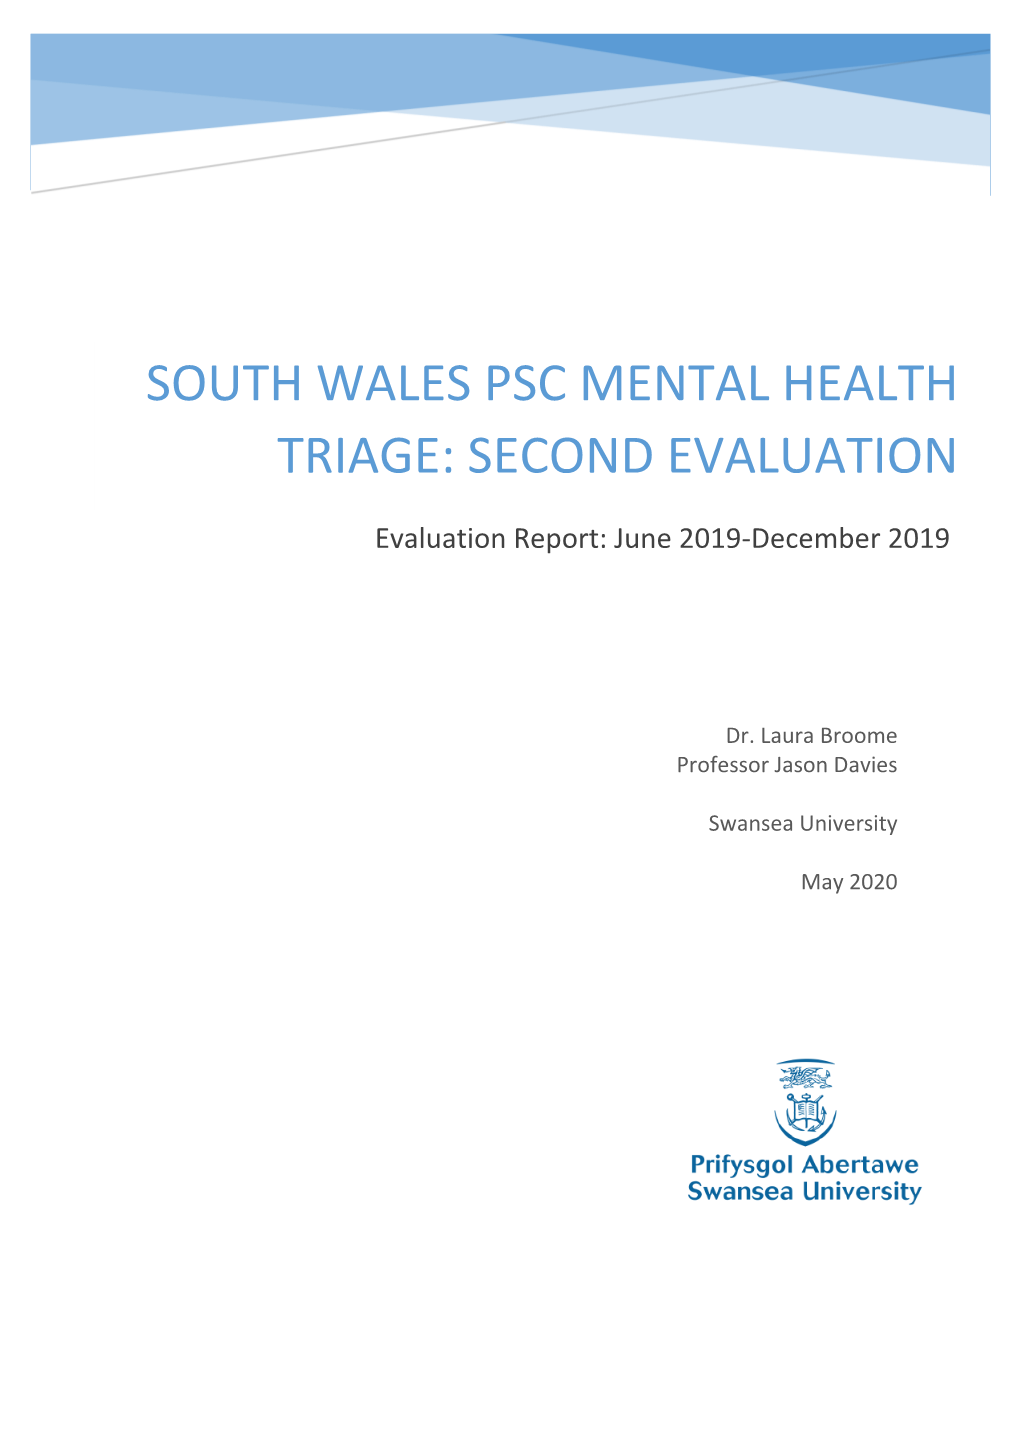 South Wales Psc Mental Health Triage: Second Evaluation